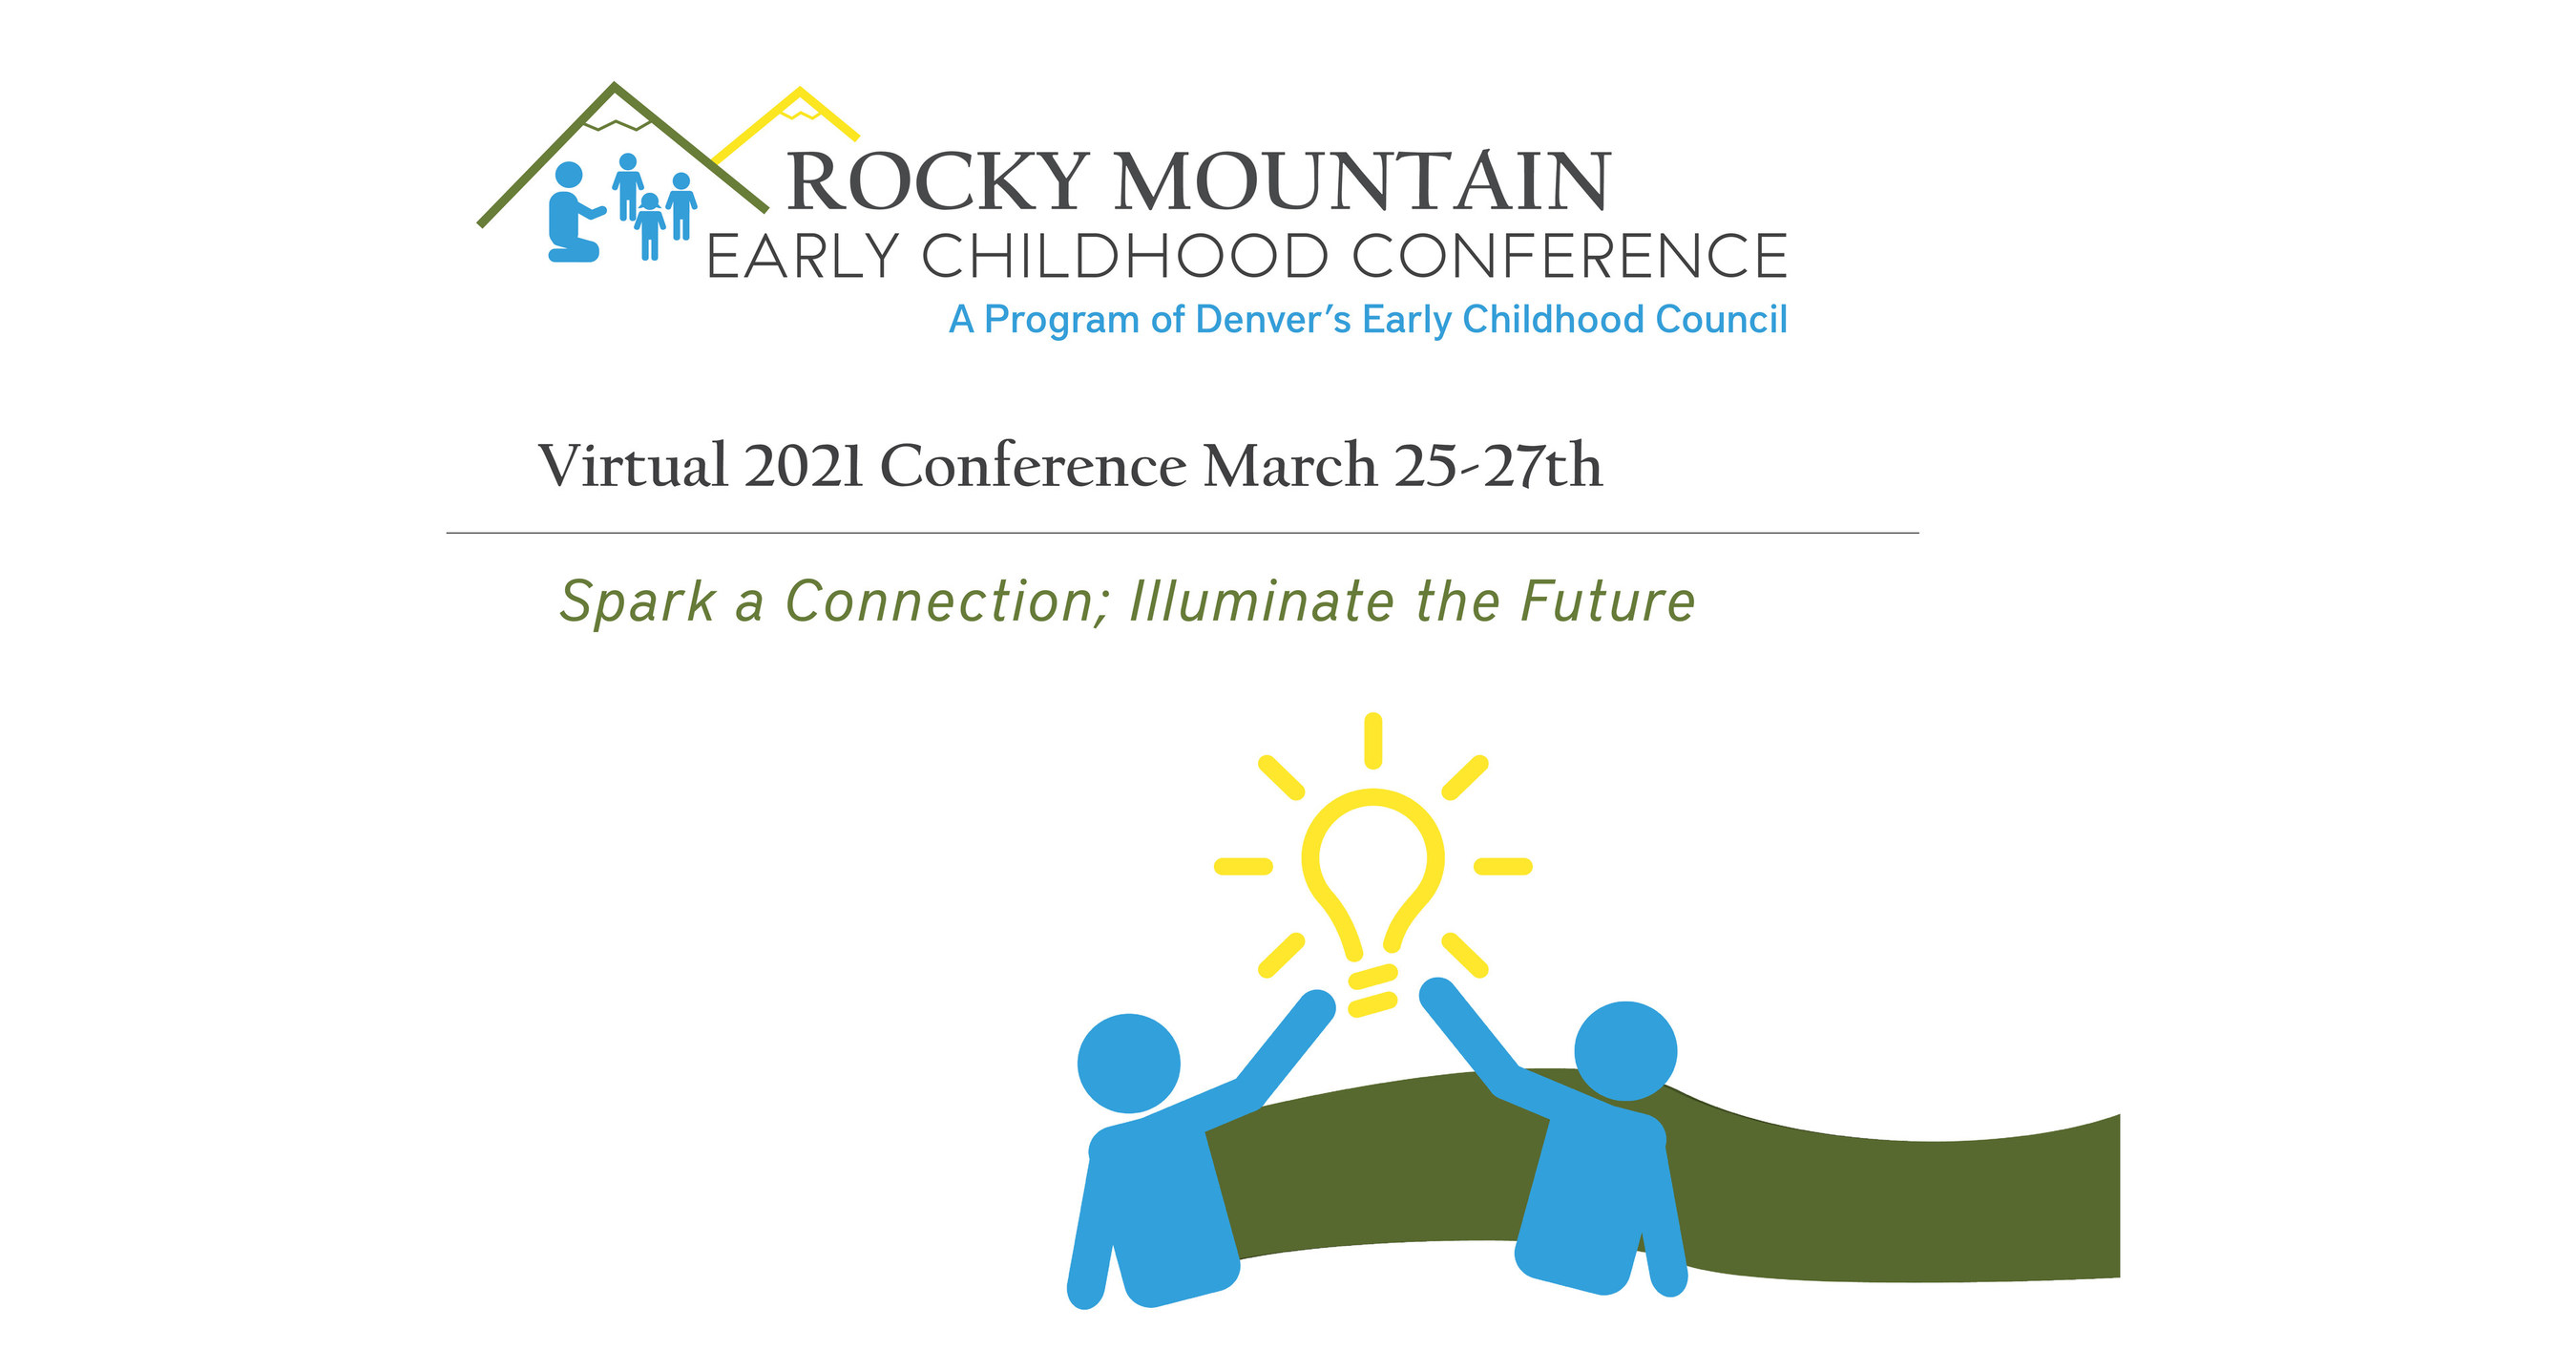 Rocky Mountain Early Childhood Conference Offers Free Training